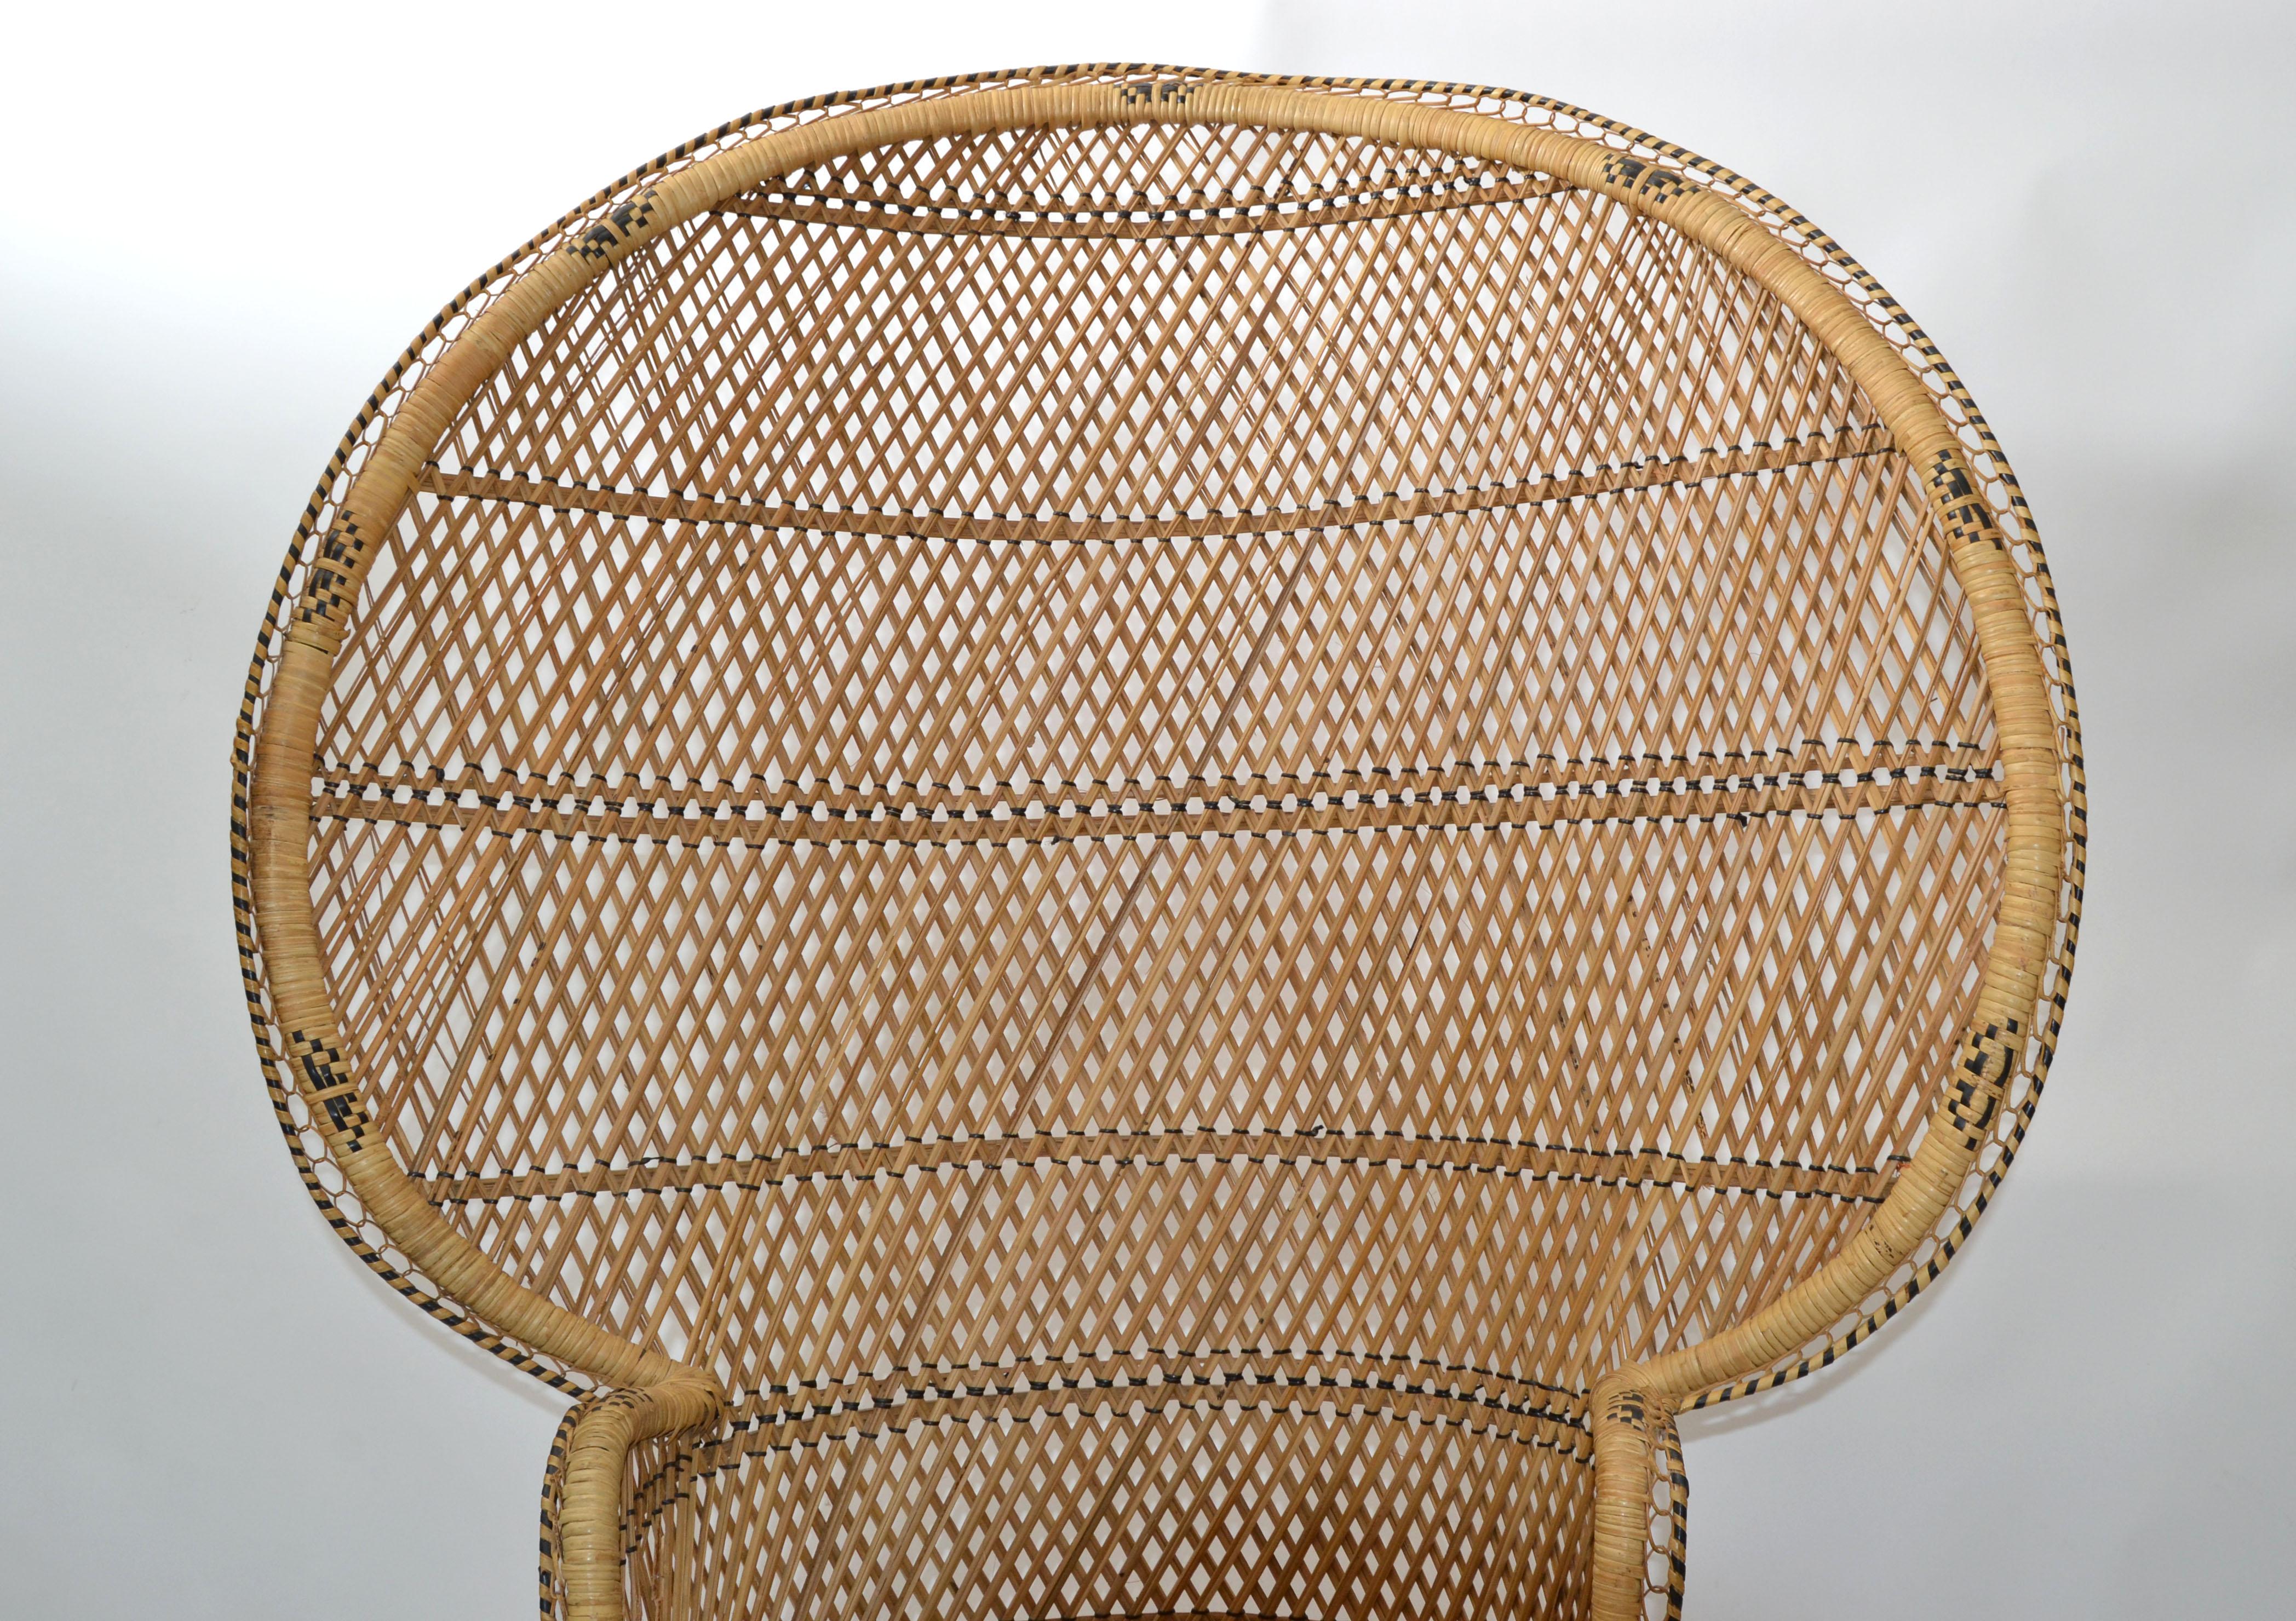 American Vintage Boho Chic Handcrafted Beige & Black Wicker, Rattan, Reed Peacock Chair For Sale